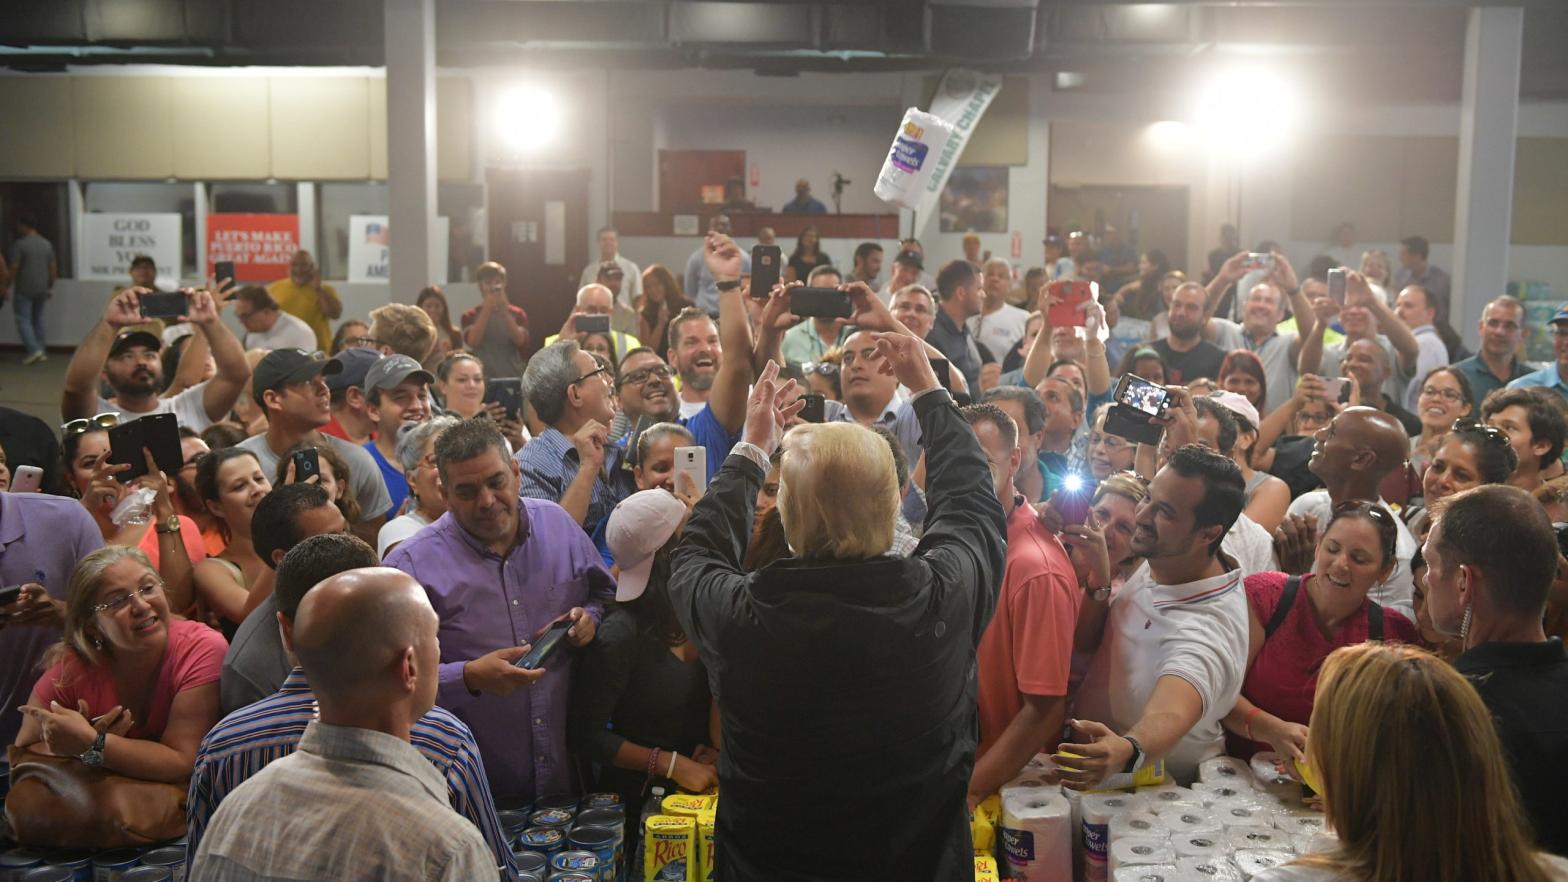 President Donald Trump takes part in a food and supply distribution at the Cavalry Chapel in Guaynabo, Puerto Rico on Oct. 3, 2017. Nearly two weeks after Hurricane Maria thrashed through the U.S. territory, much of the islands remains short of food and without access to power or drinking water. (Photo: Mandel Ngan/AFP, Getty Images)